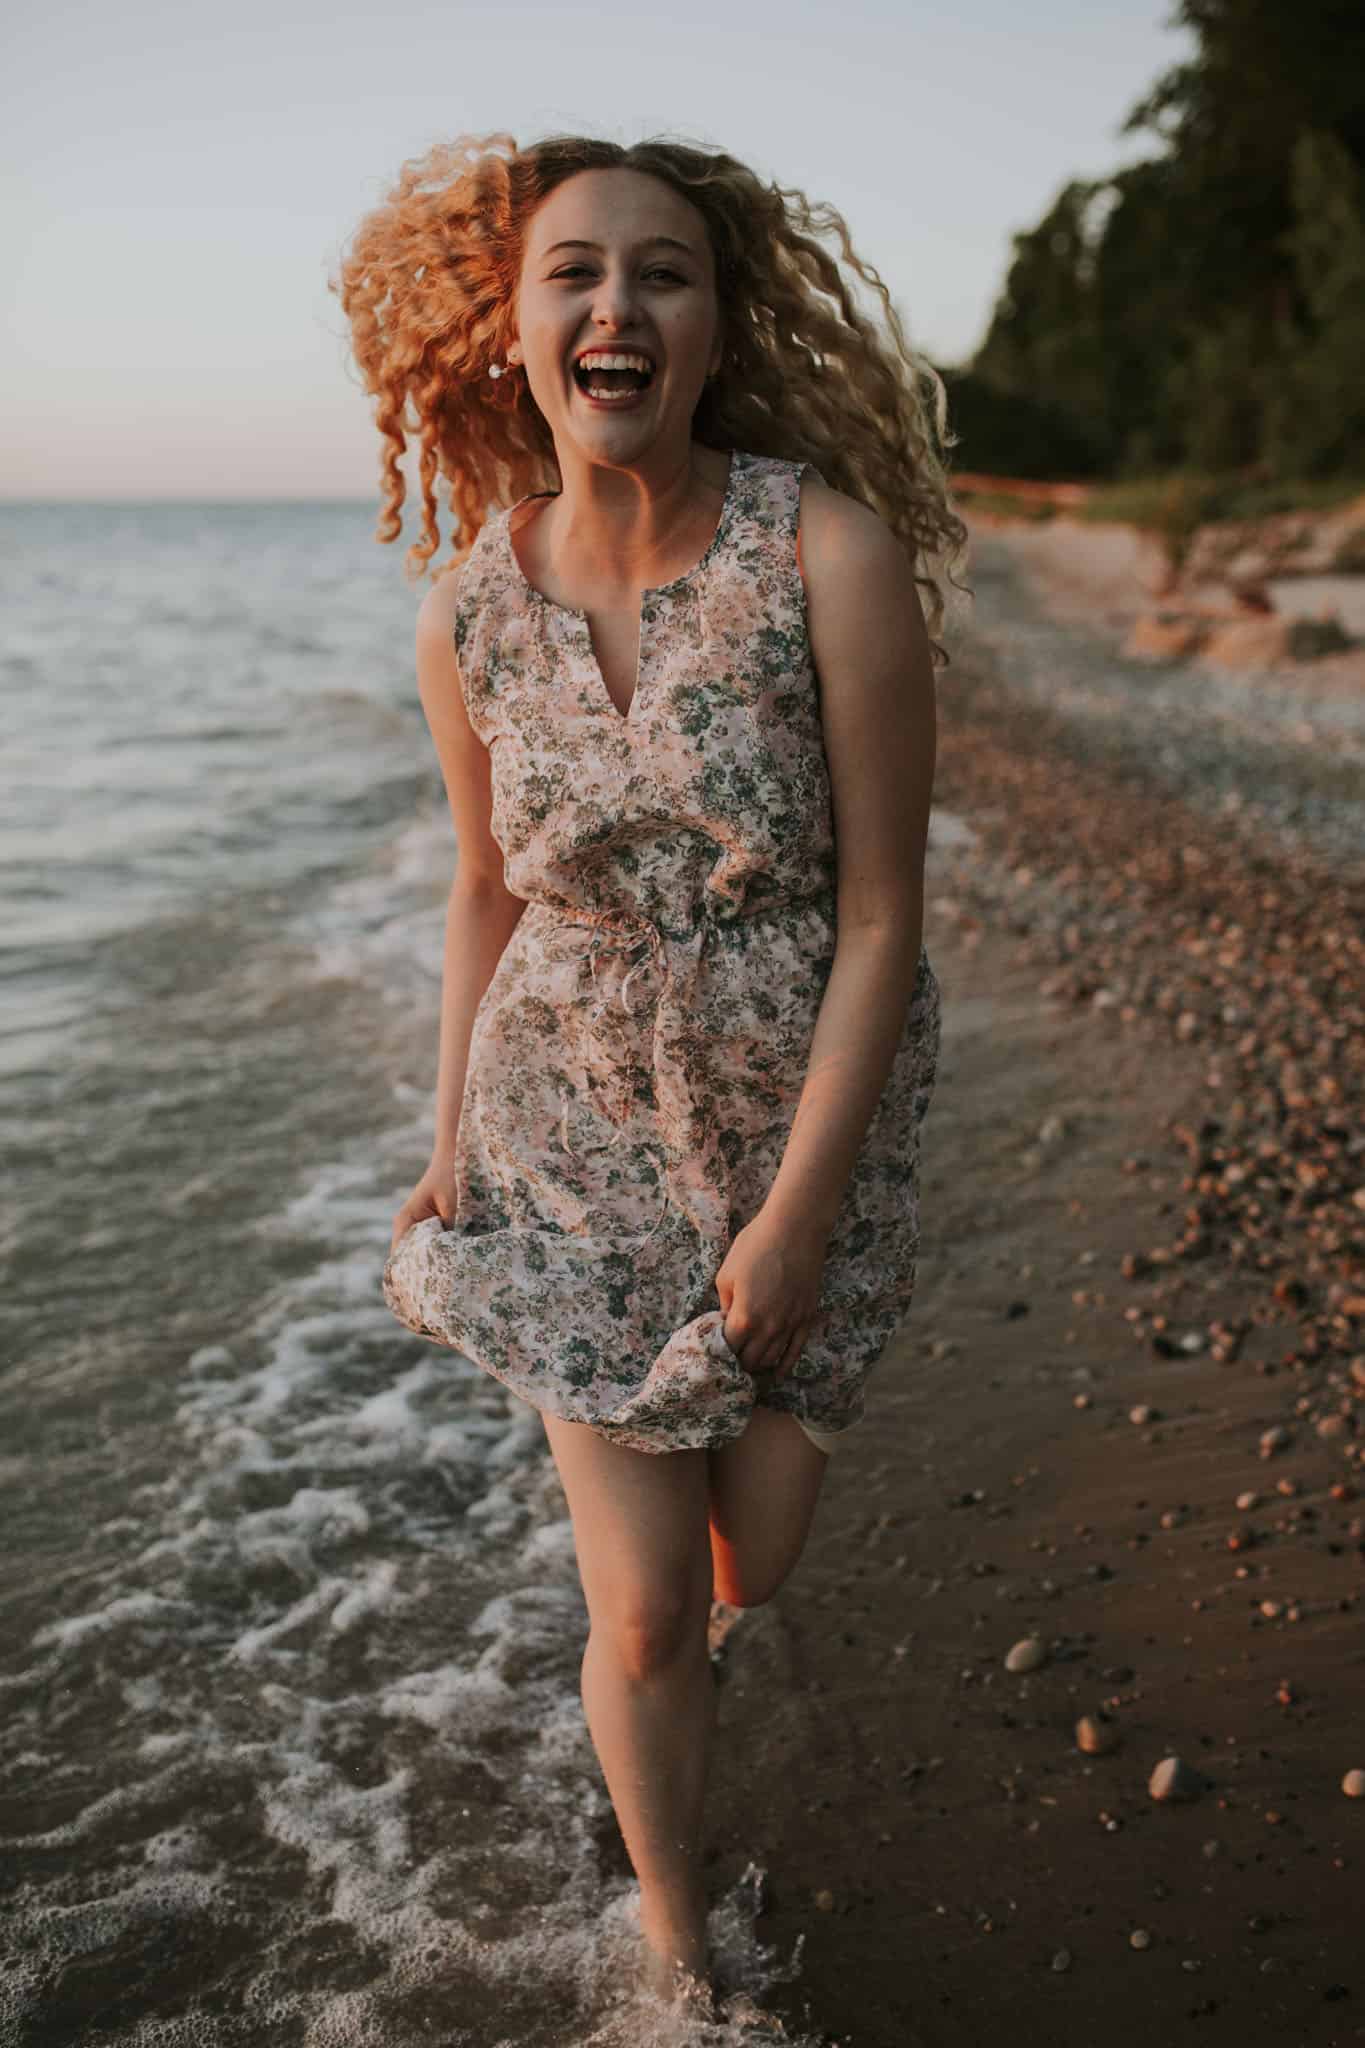 girl running on a beach in northern michigan at sunset